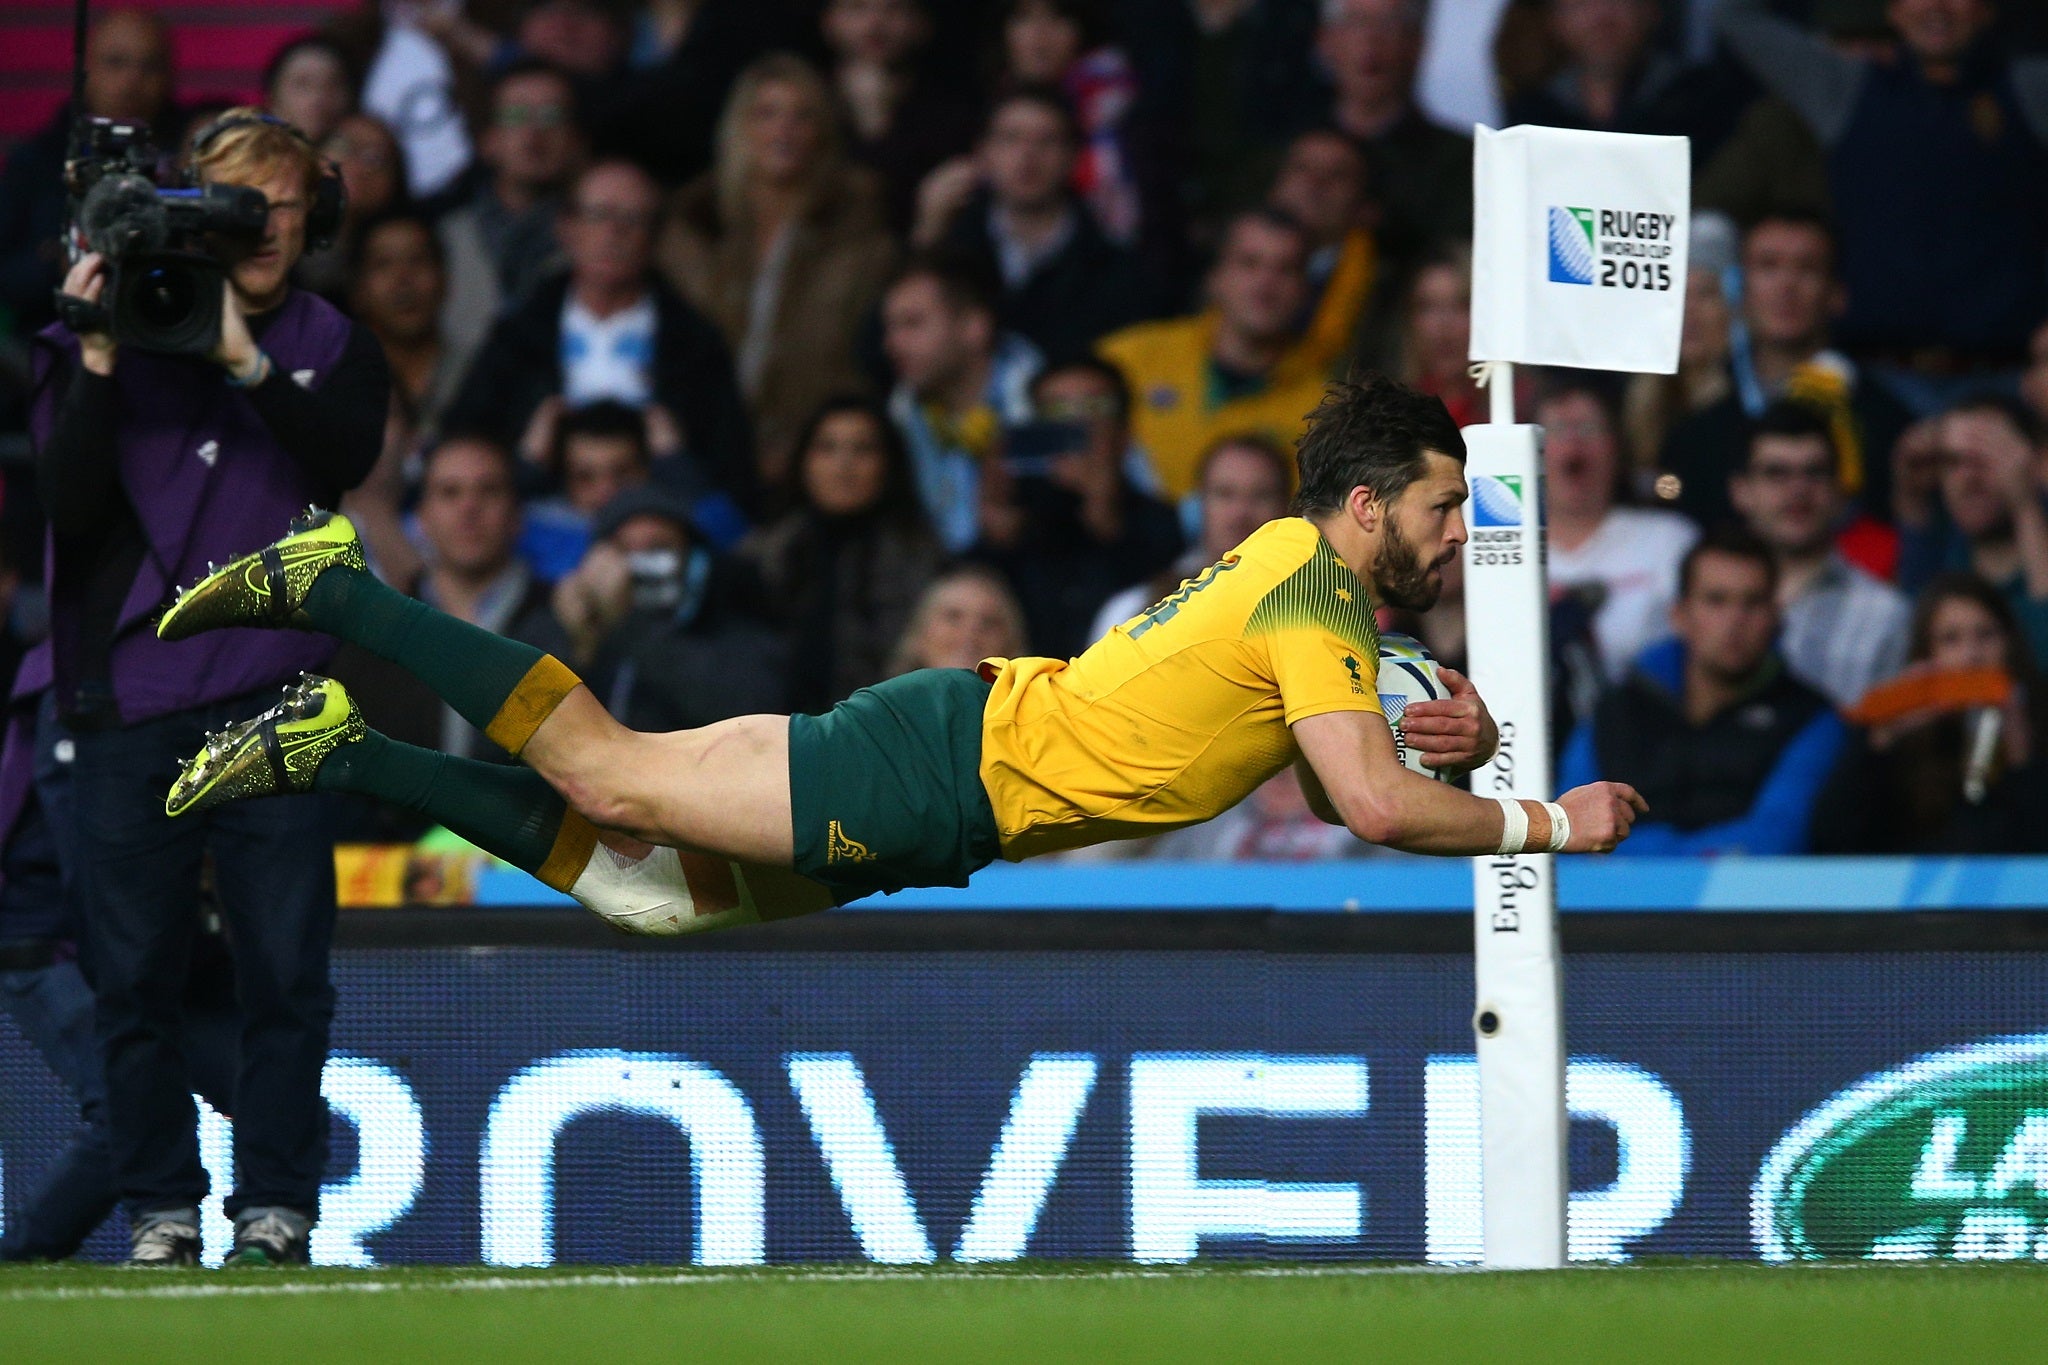 Adam Ashley-Cooper dives over for the second of his three tries